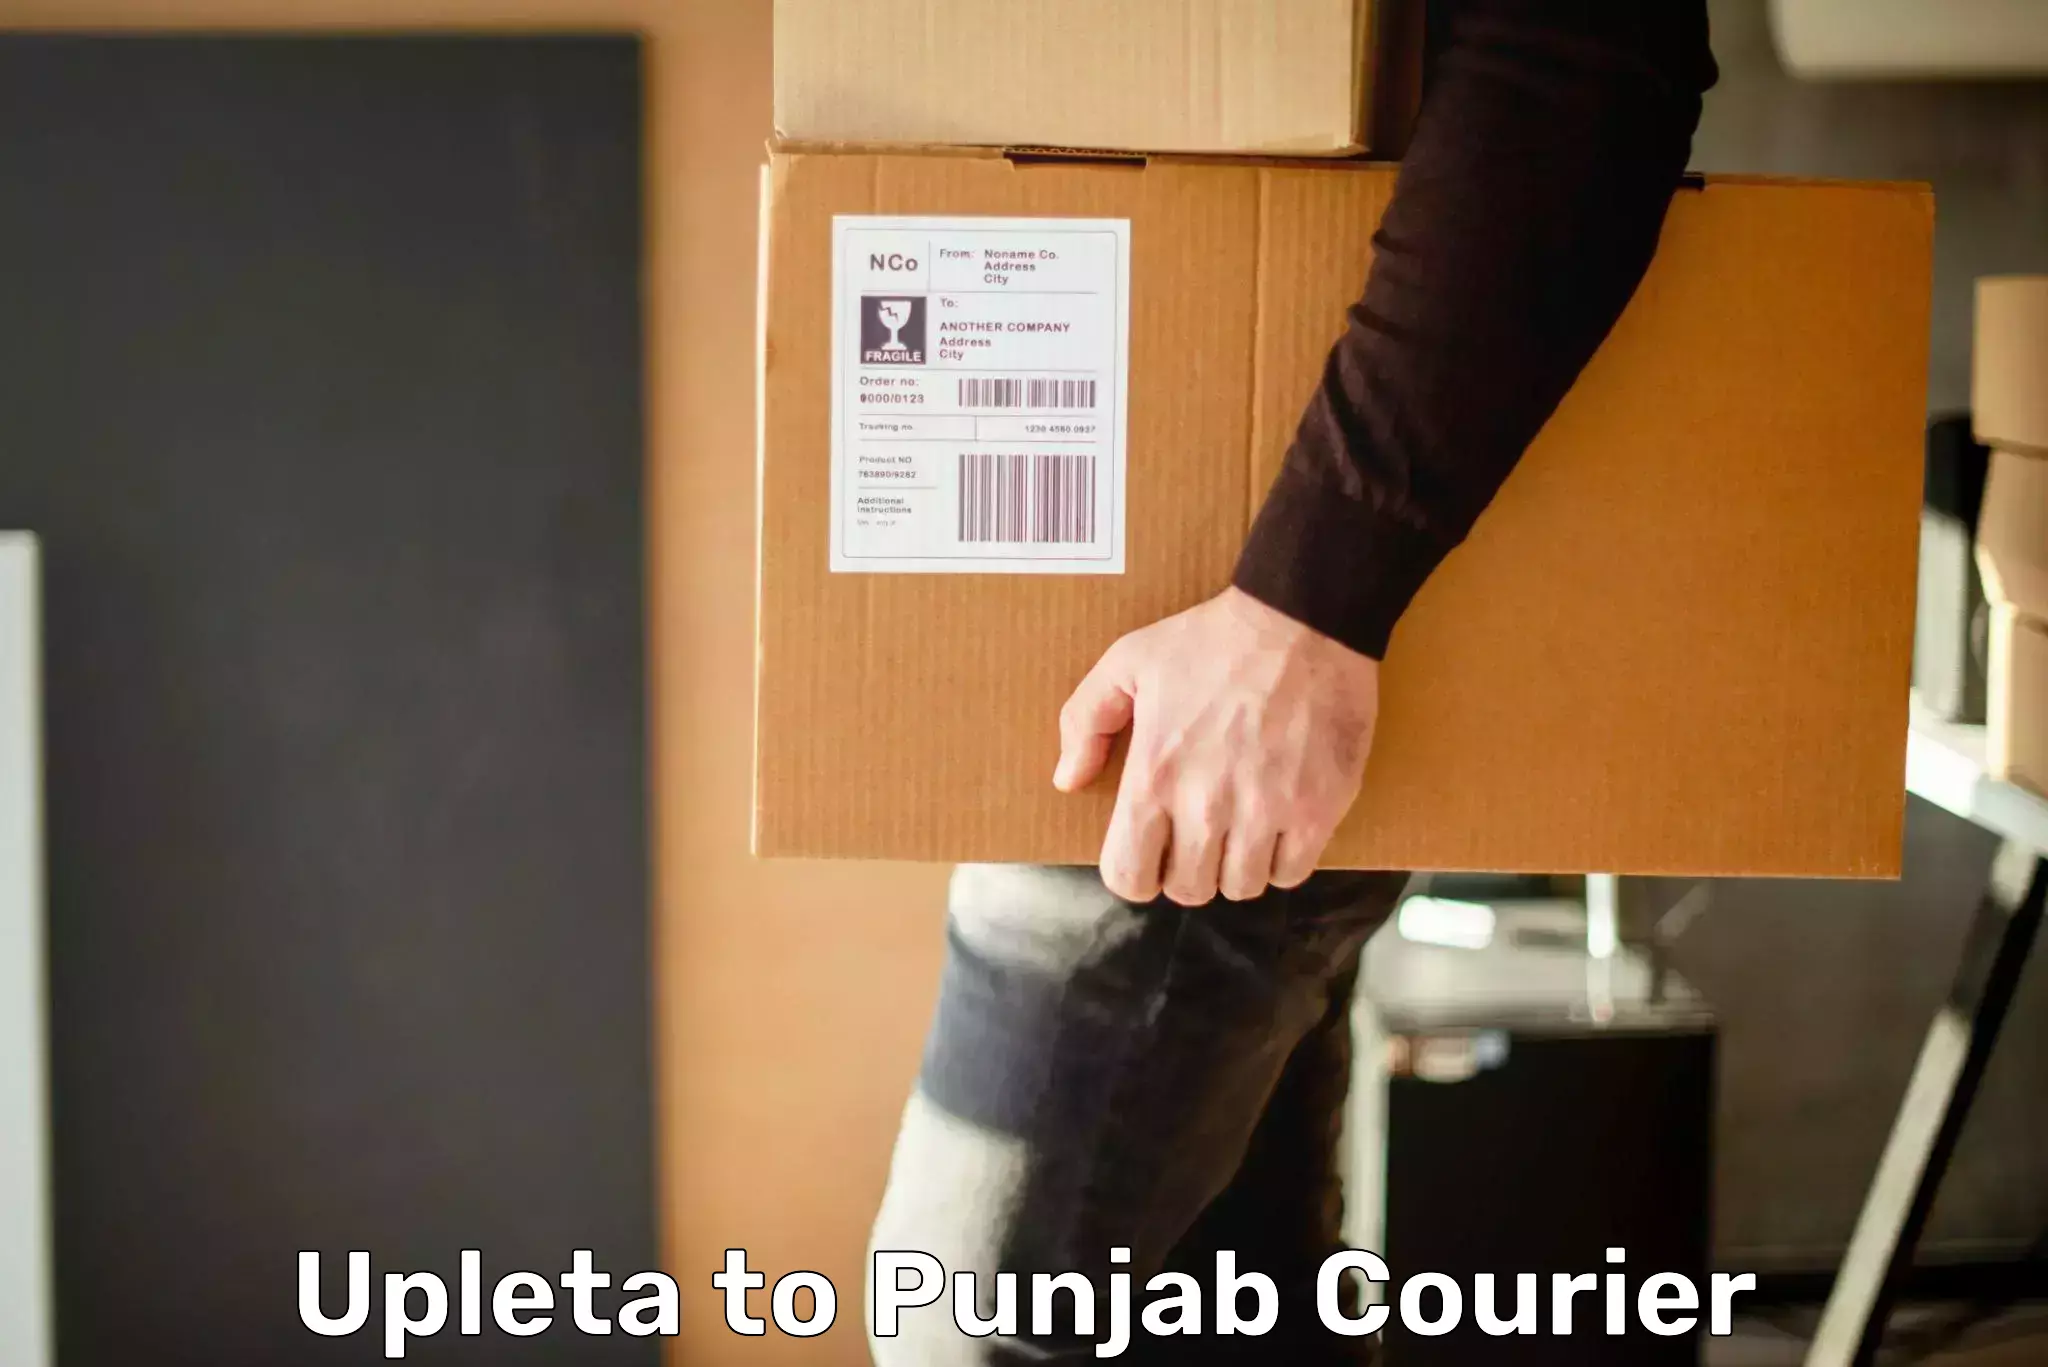 Residential courier service Upleta to Punjab